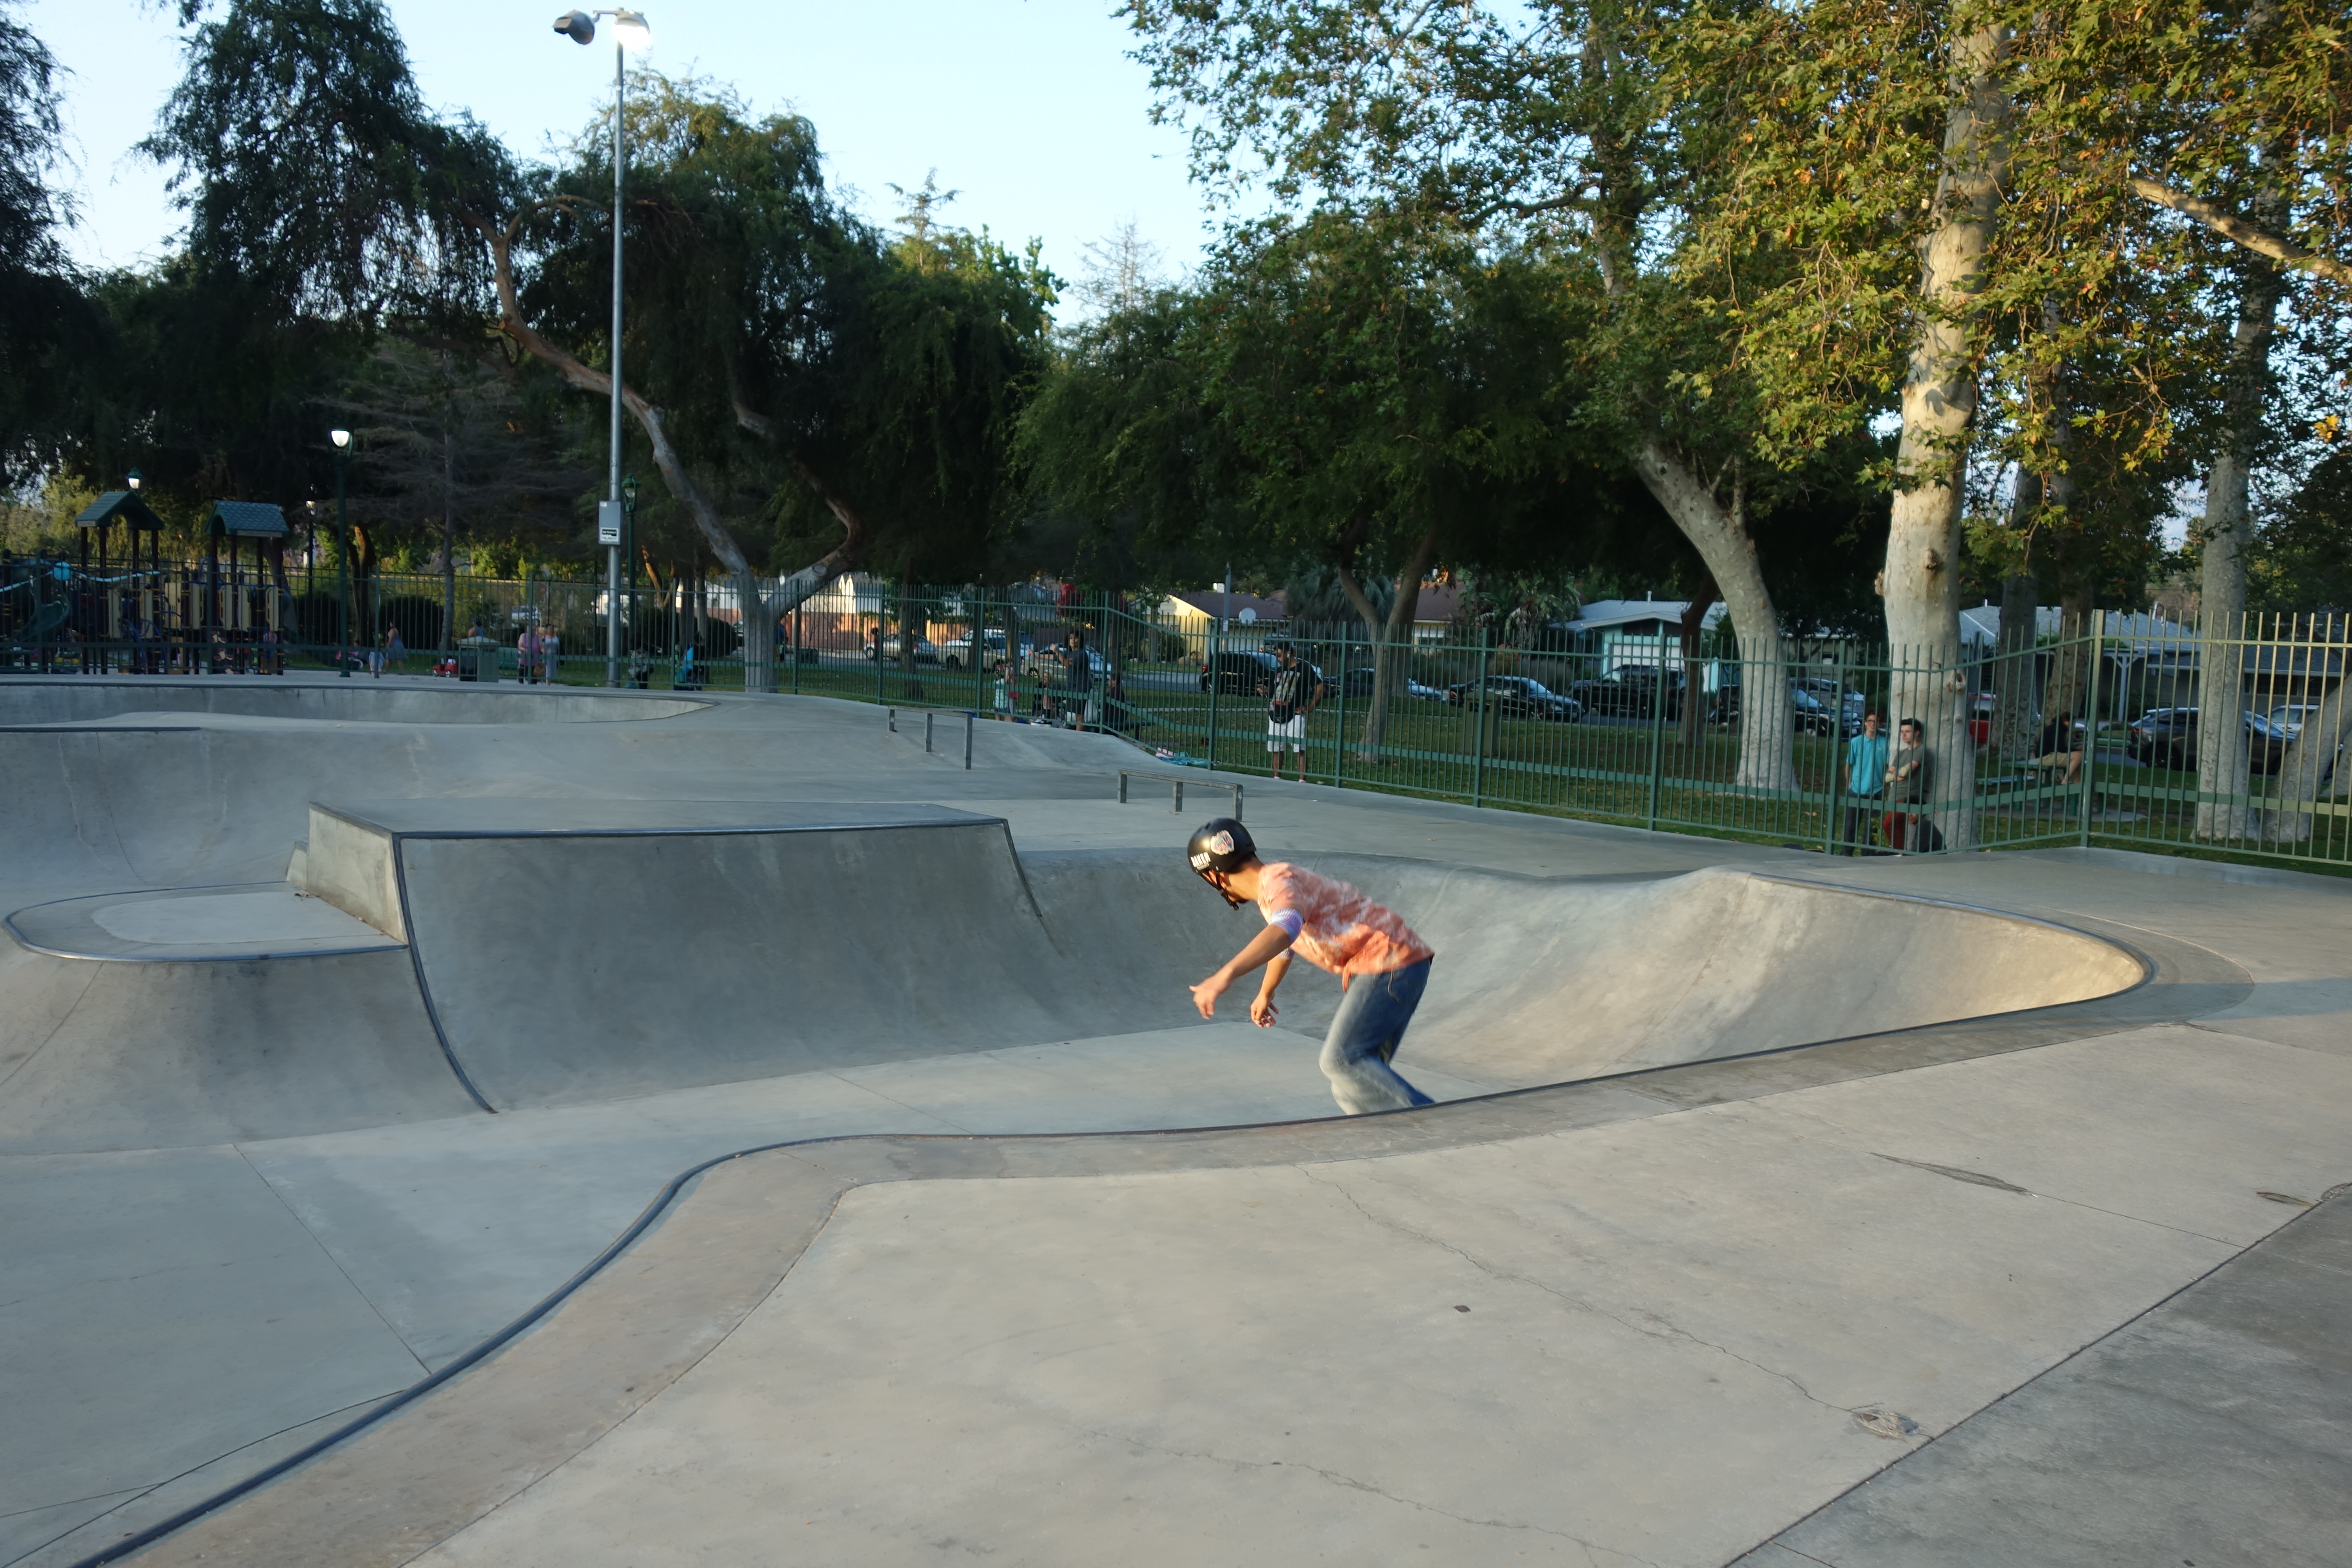 Two BMX bicycle participants are at Valley Skate Park in Burbank, CA.